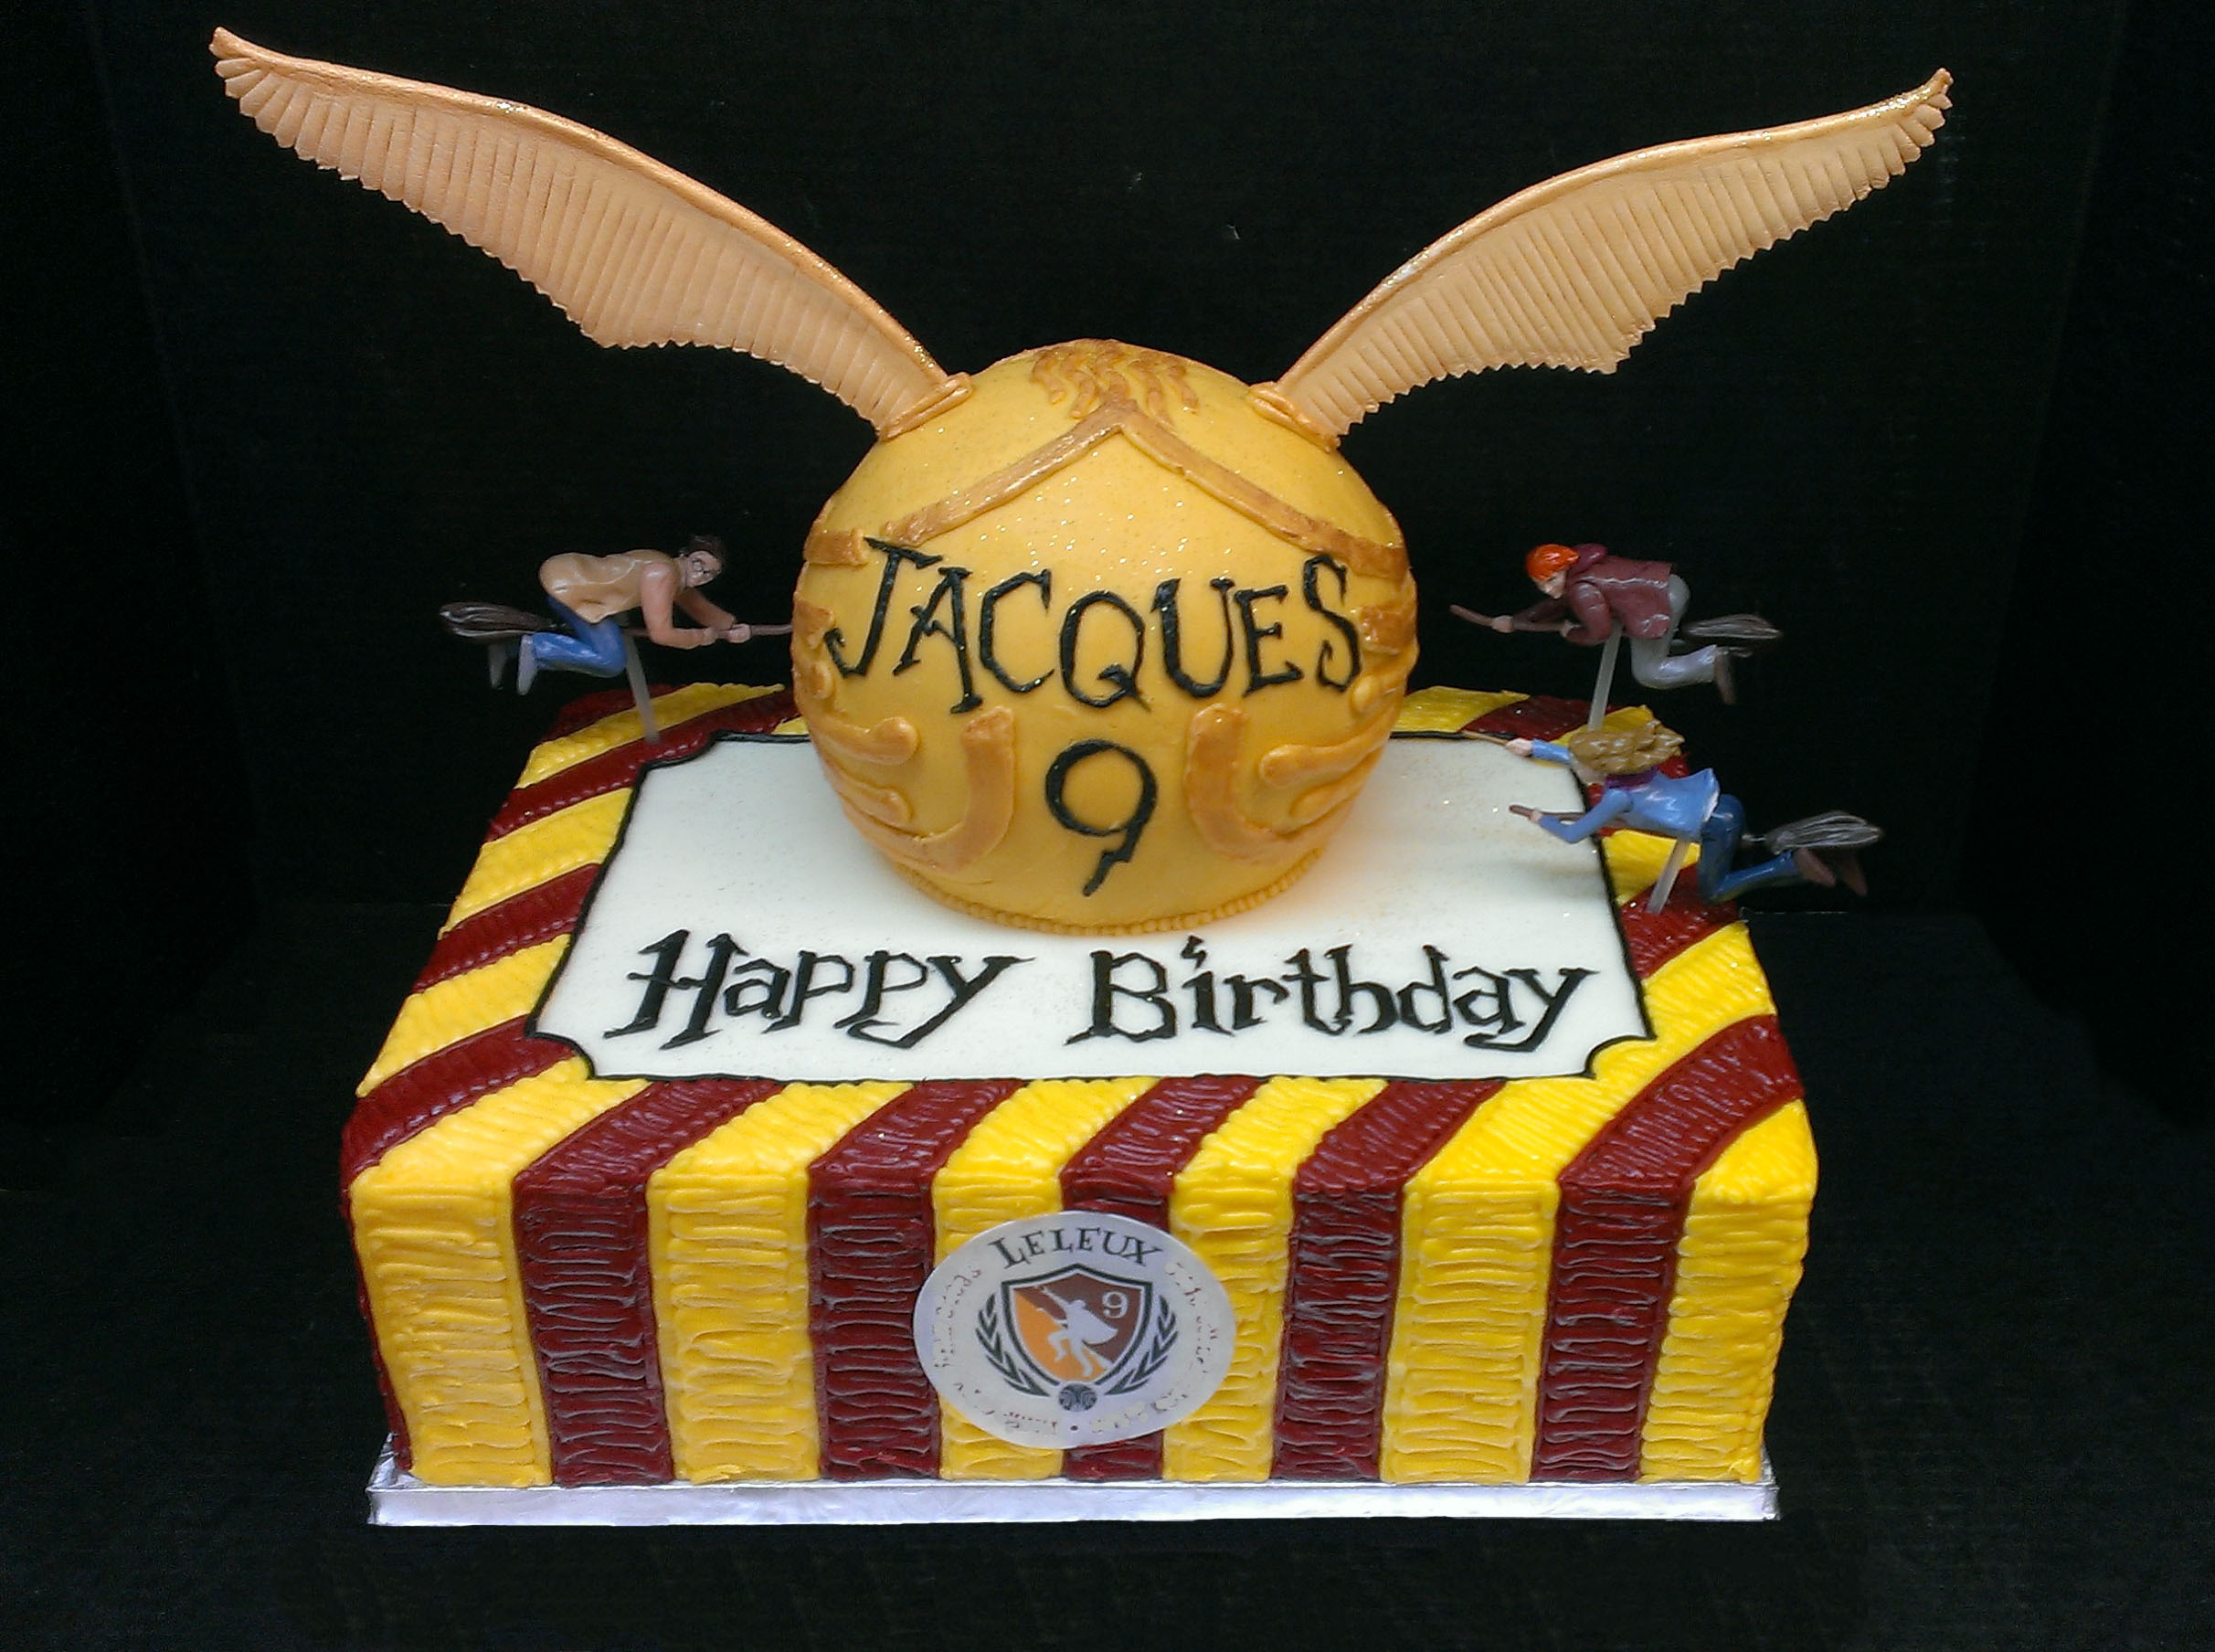 How to: Amazing Harry Potter Cake Design with golden snitch and flowers 